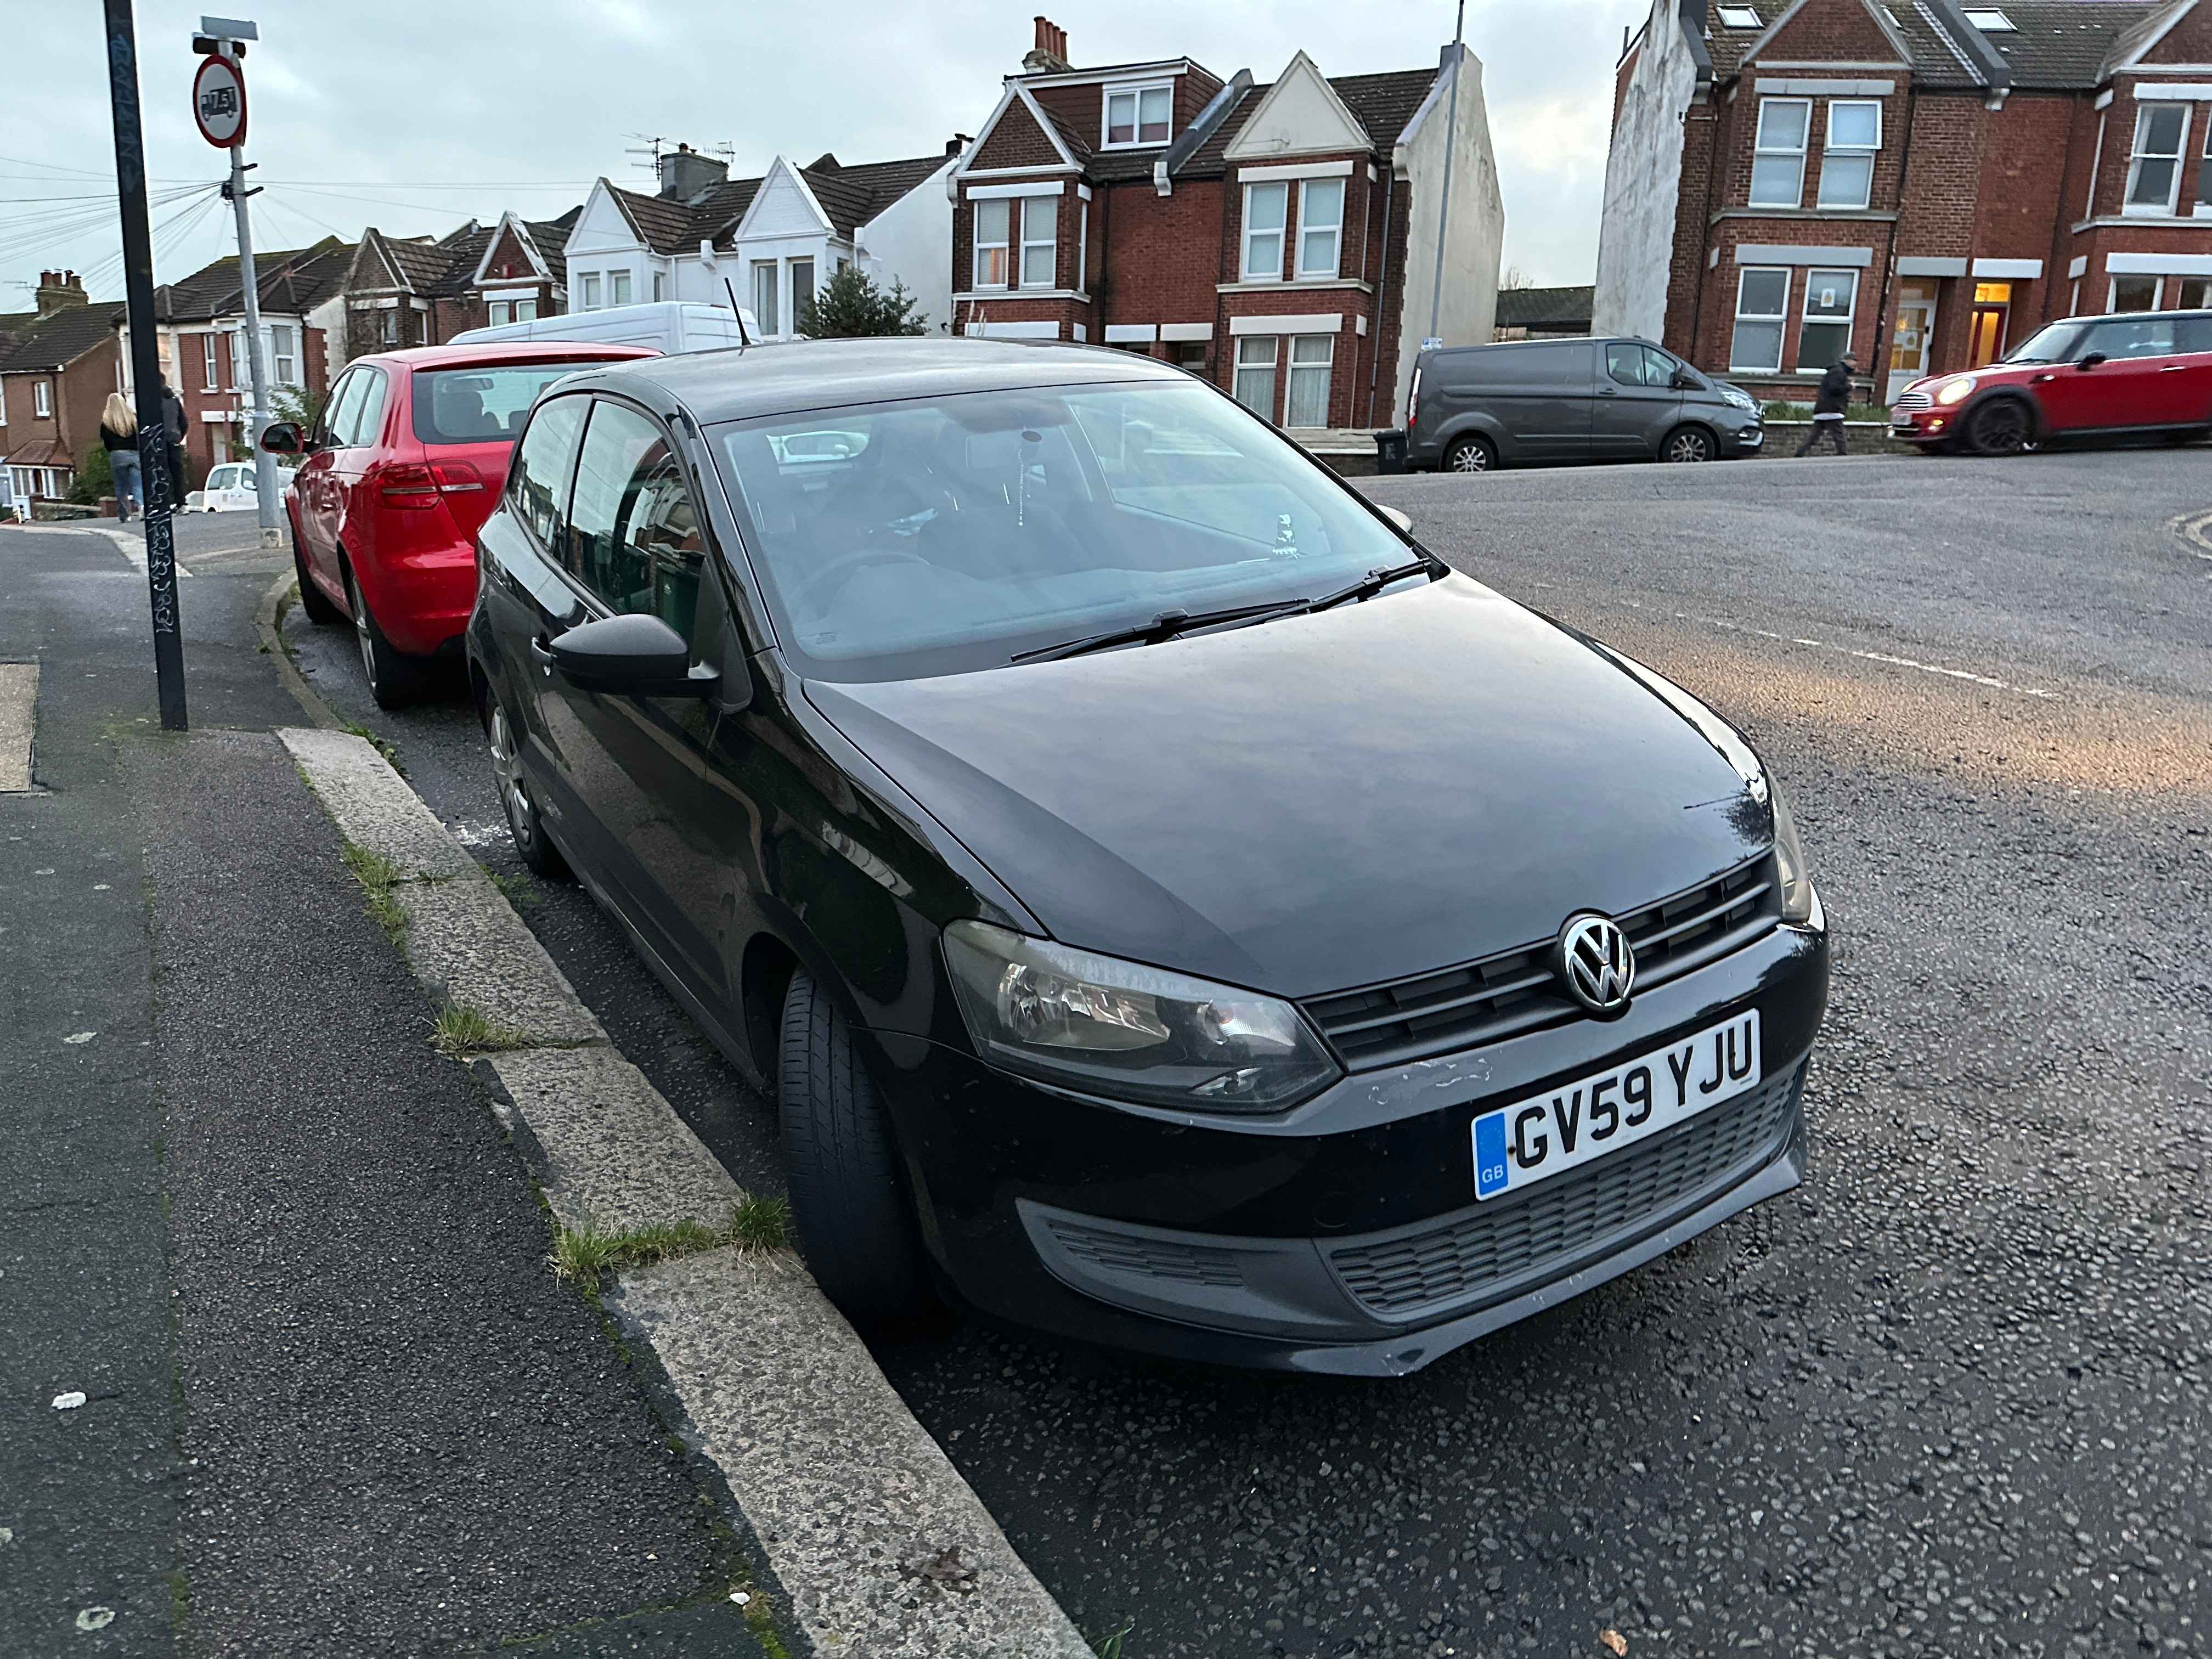 Photograph of GV59 YJU - a Black Volkswagen Polo parked in Hollingdean by a non-resident. The second of five photographs supplied by the residents of Hollingdean.